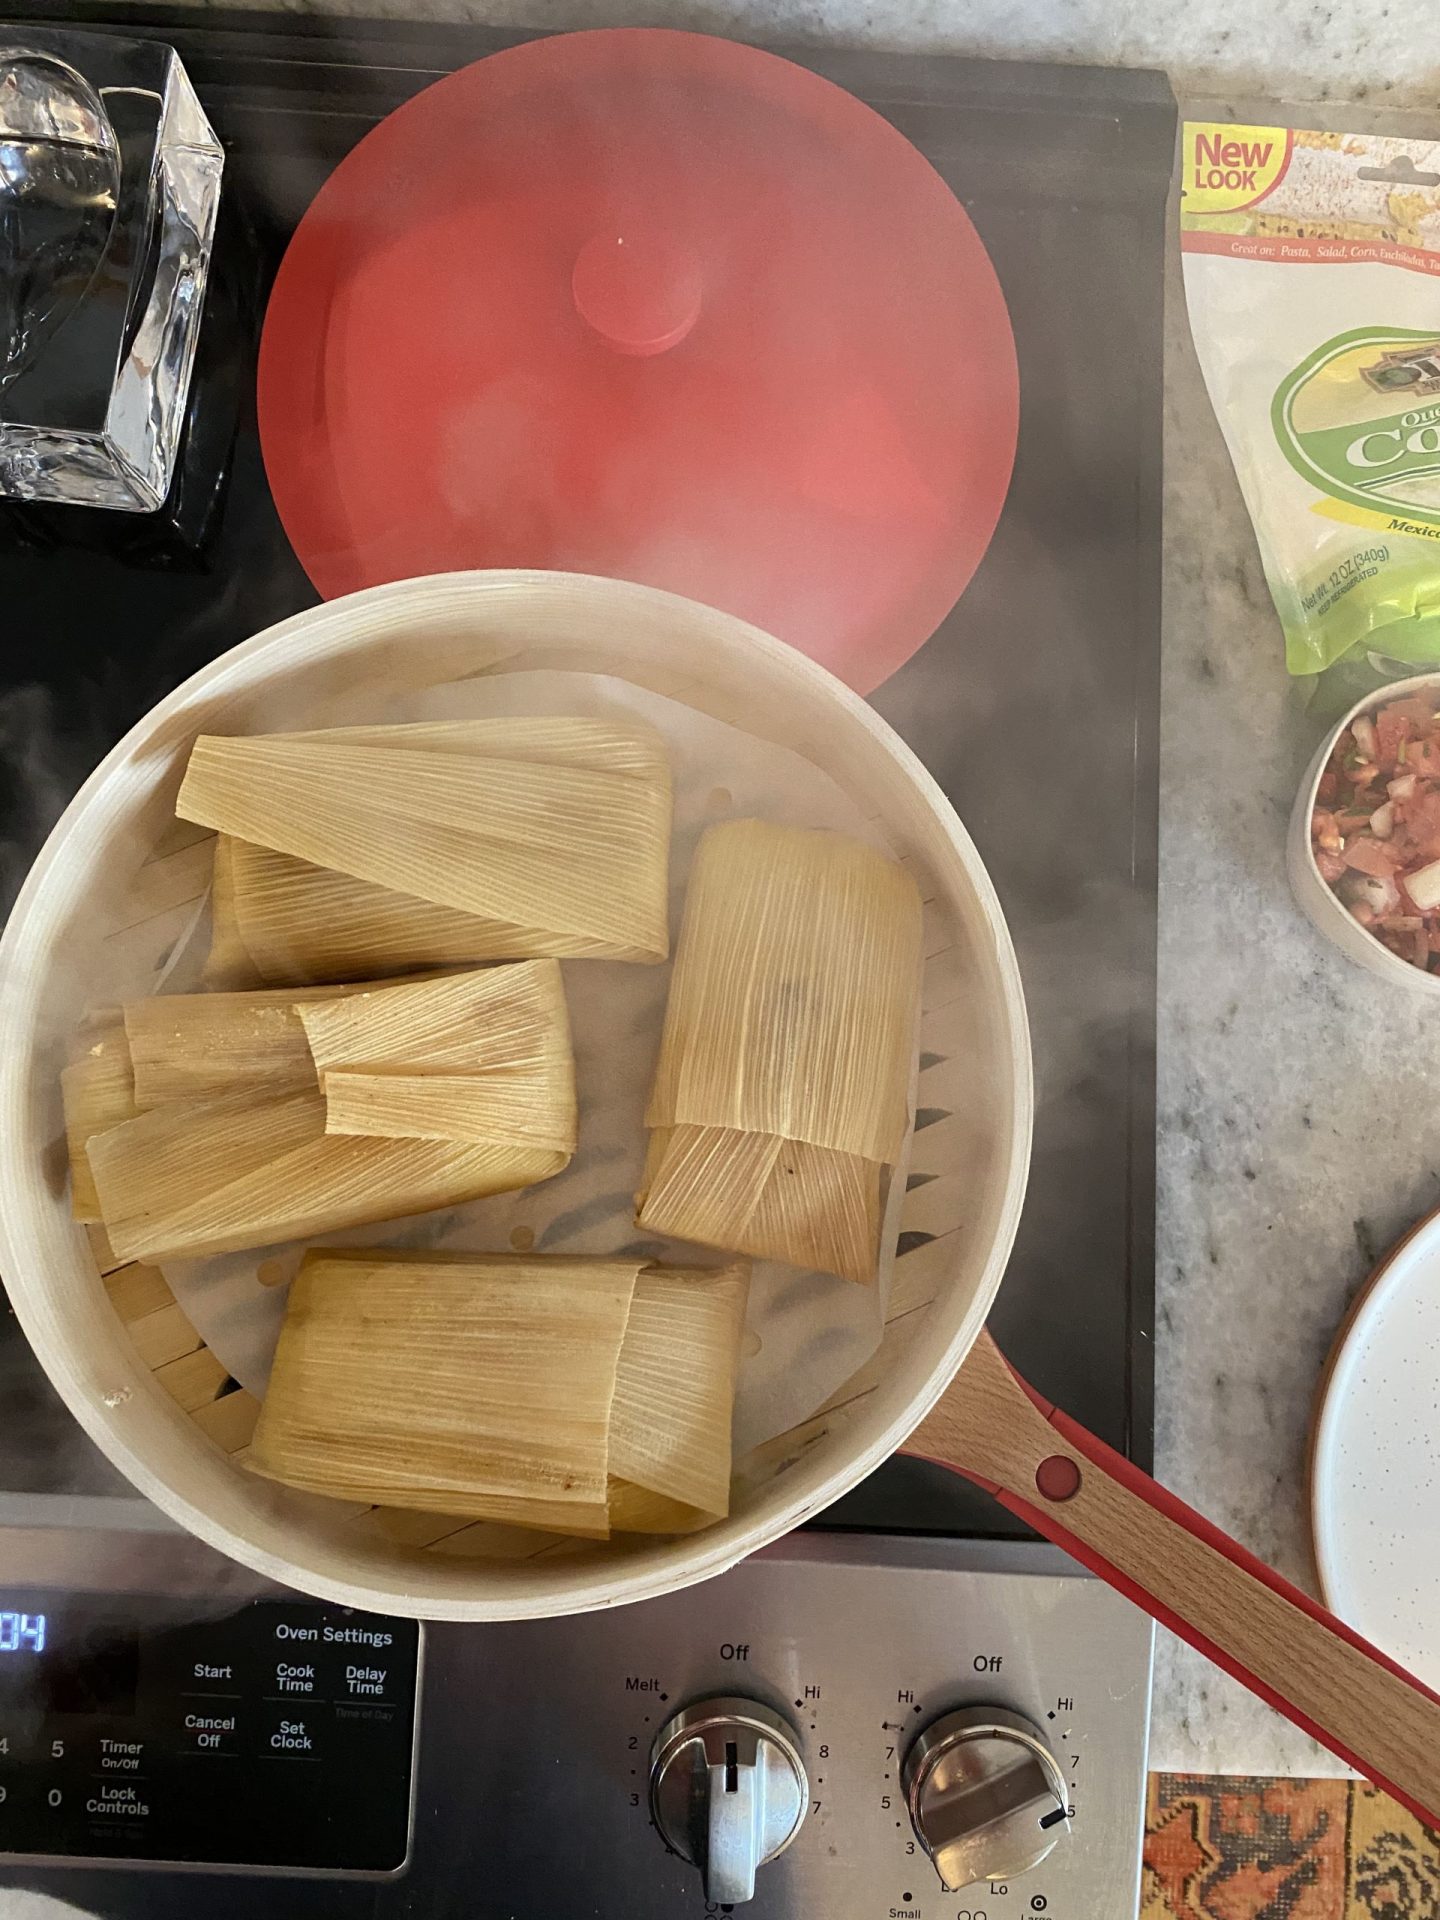 How To Steam Tamales Without A Steamer